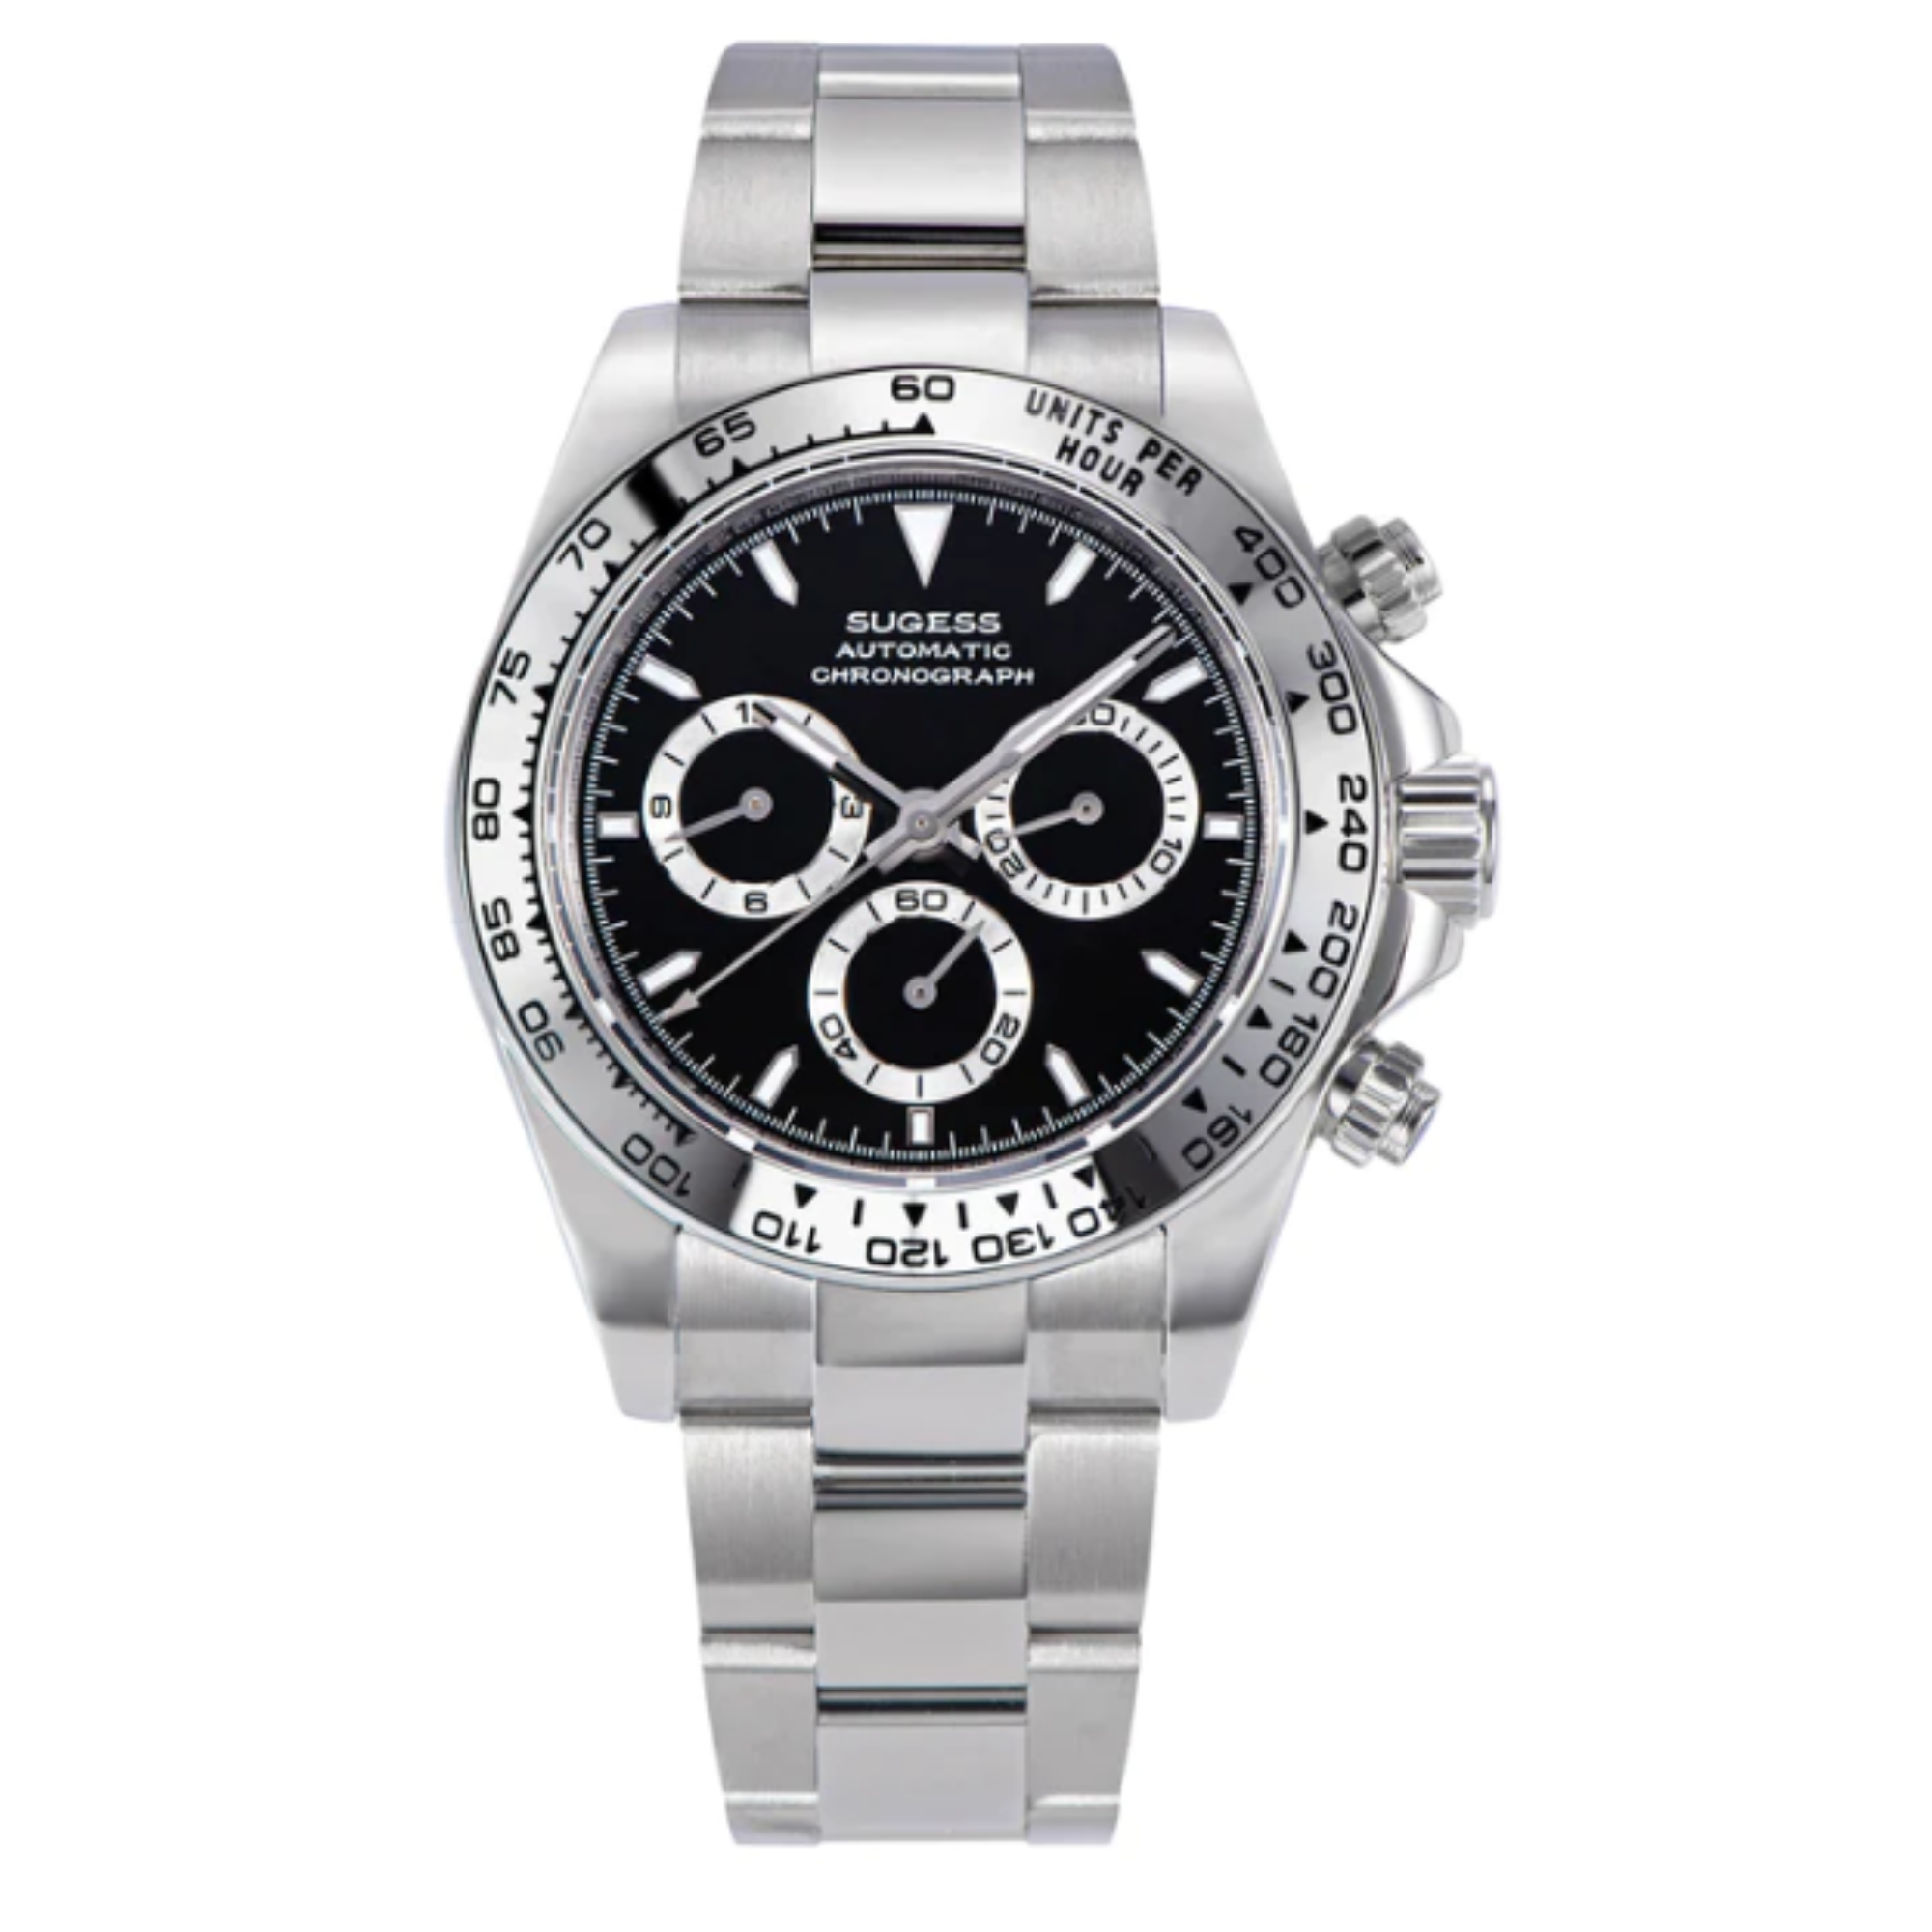 Sugess Automatic Chronograph 418-2 Black Dial Stainless Steel Bezel Professional